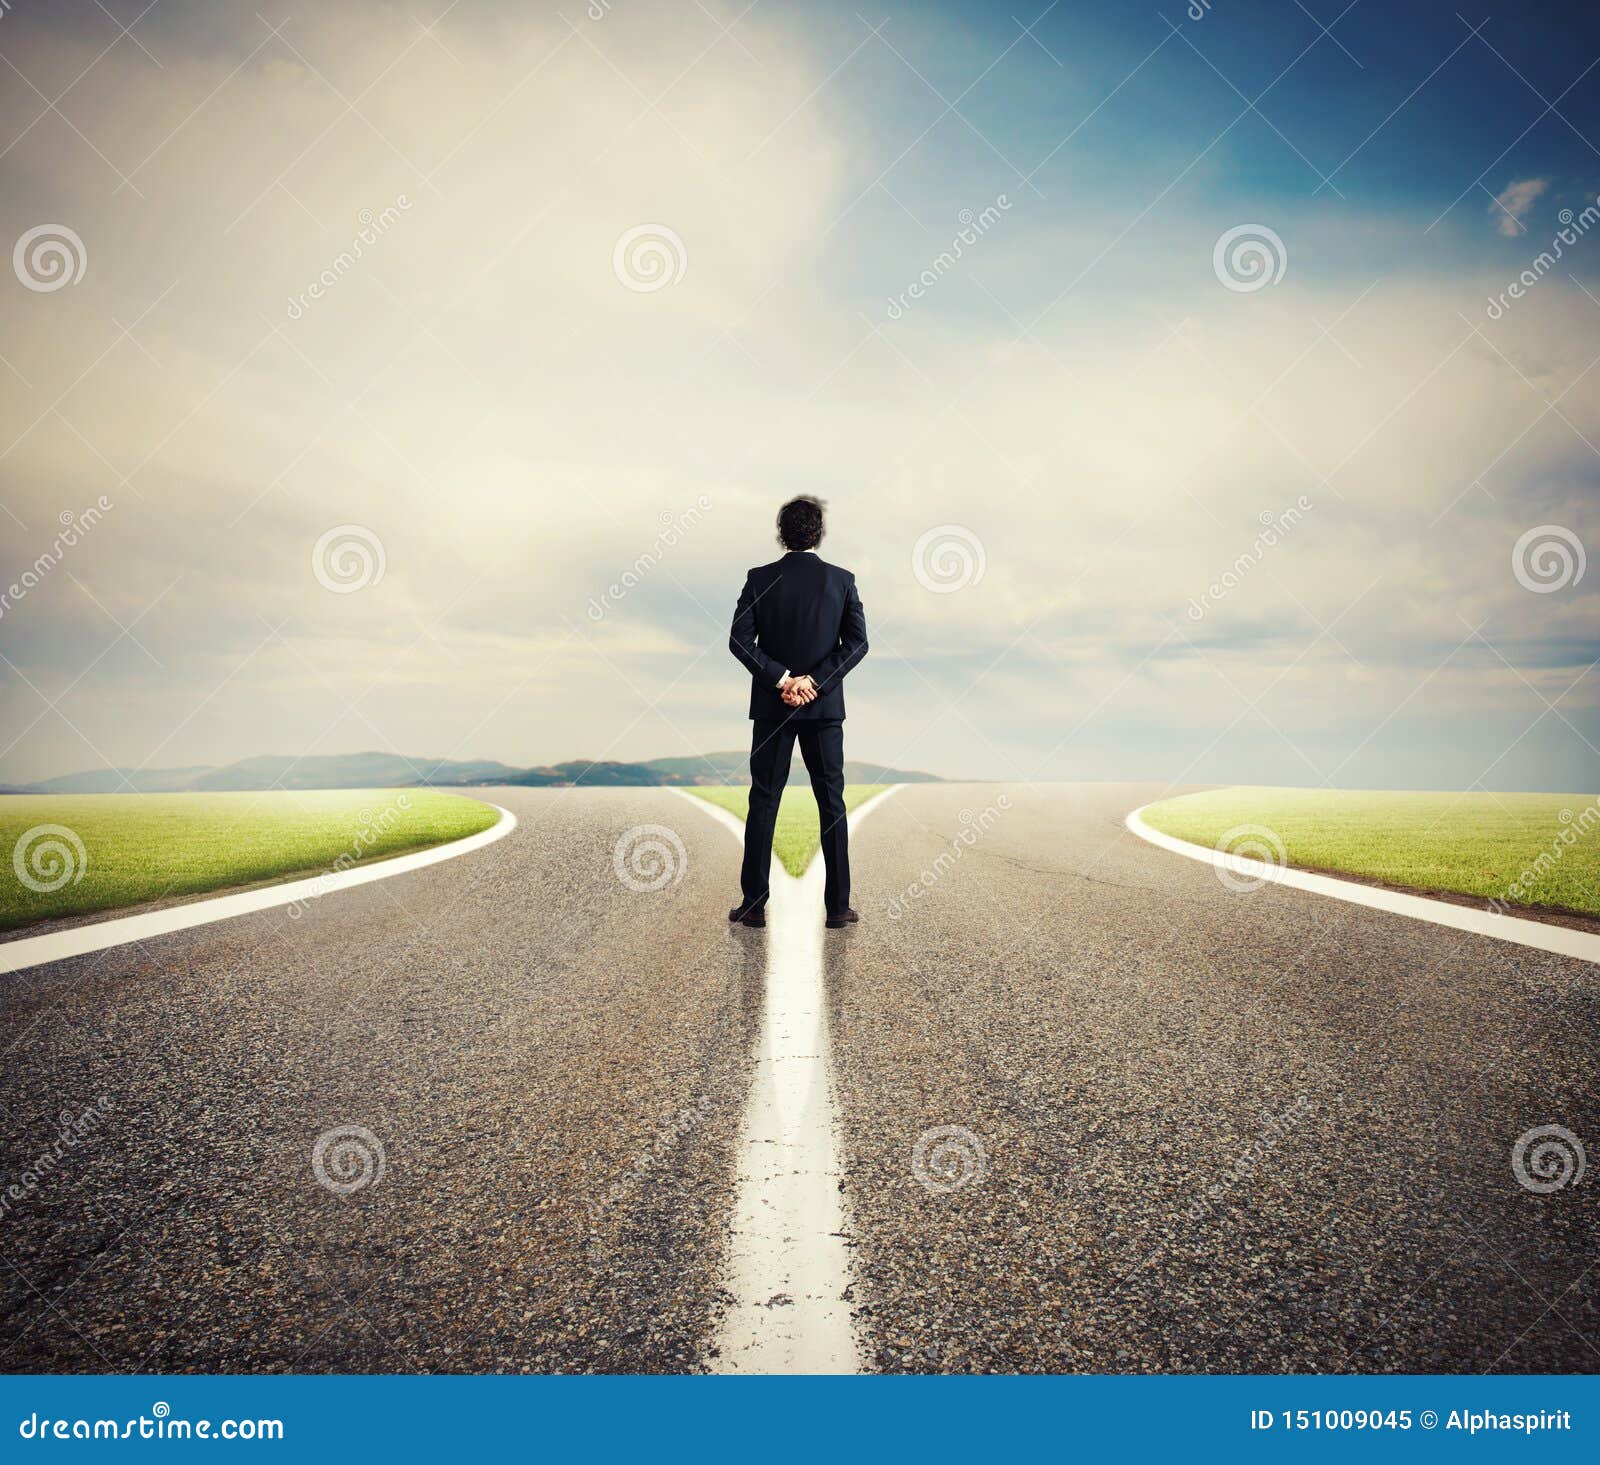 choices of a businessman at a crossroads. concept of decision